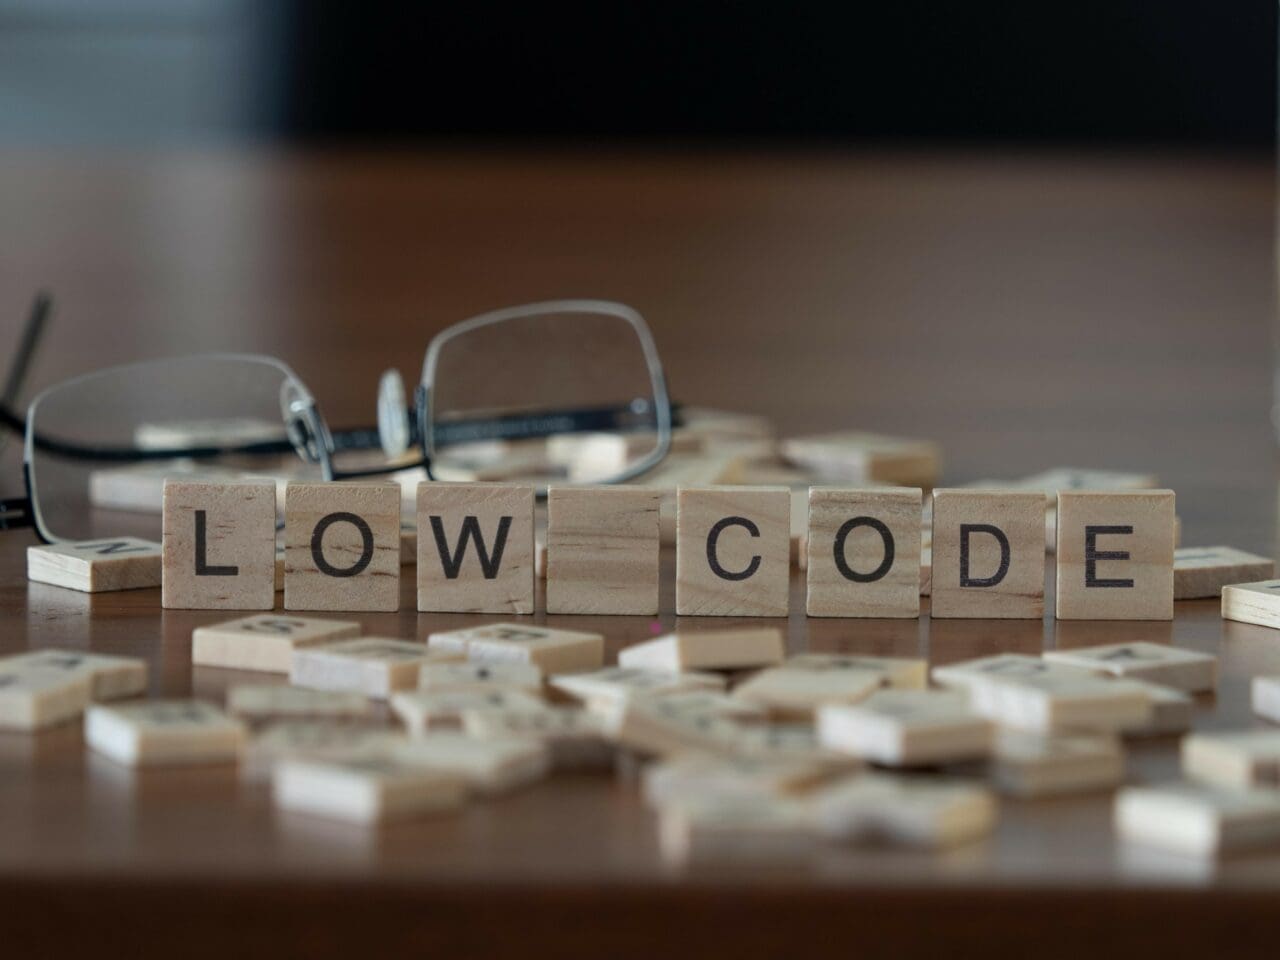 Small wooden blocks with 'Low Code' written on them, placed on a desk with glasses in the background